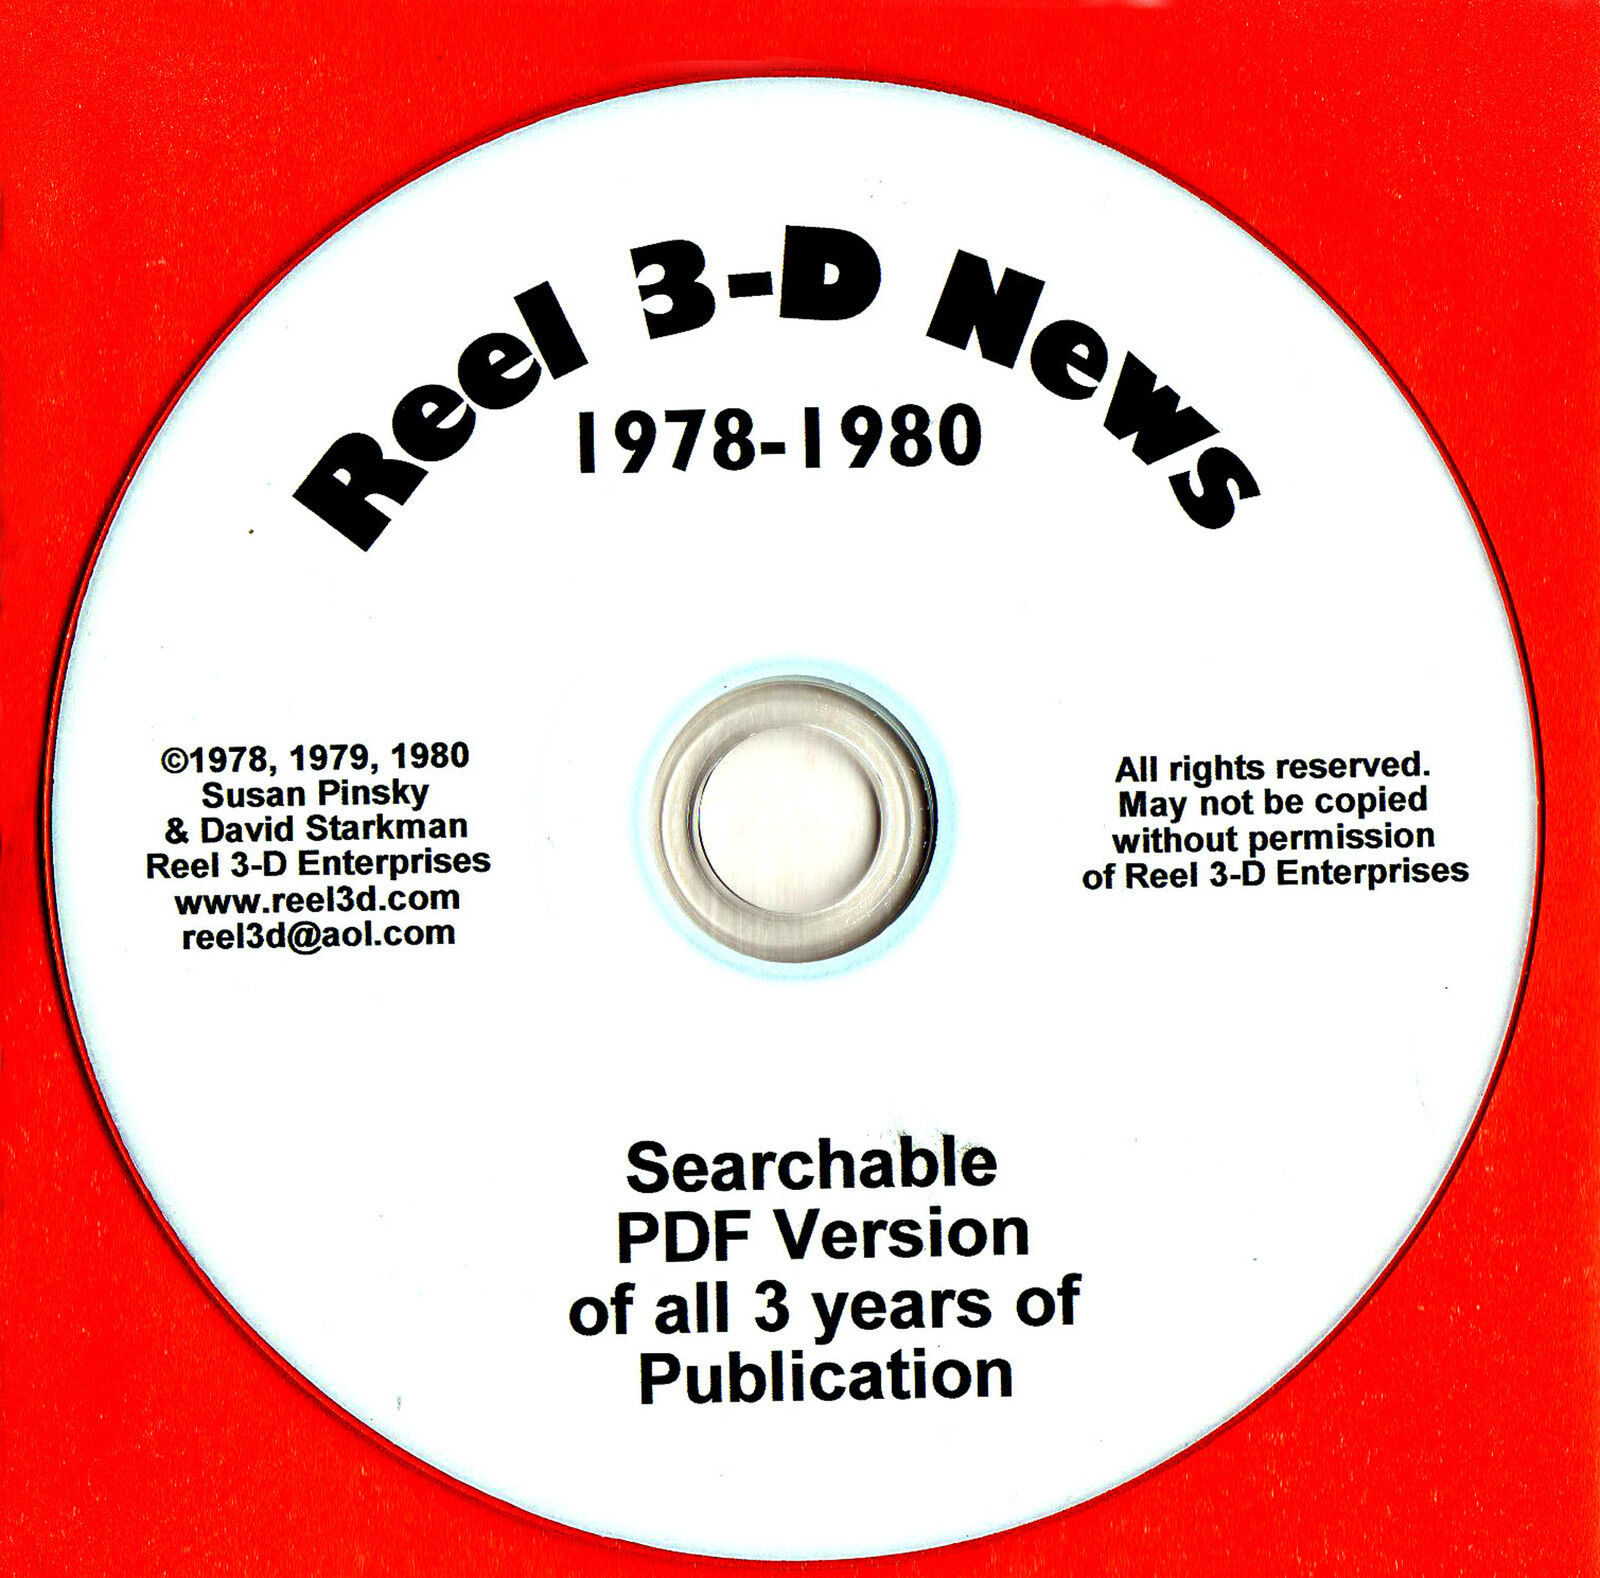 Reel 3-D News 1978-1980 CD with all 3 years in searchable PDF Format View-Master